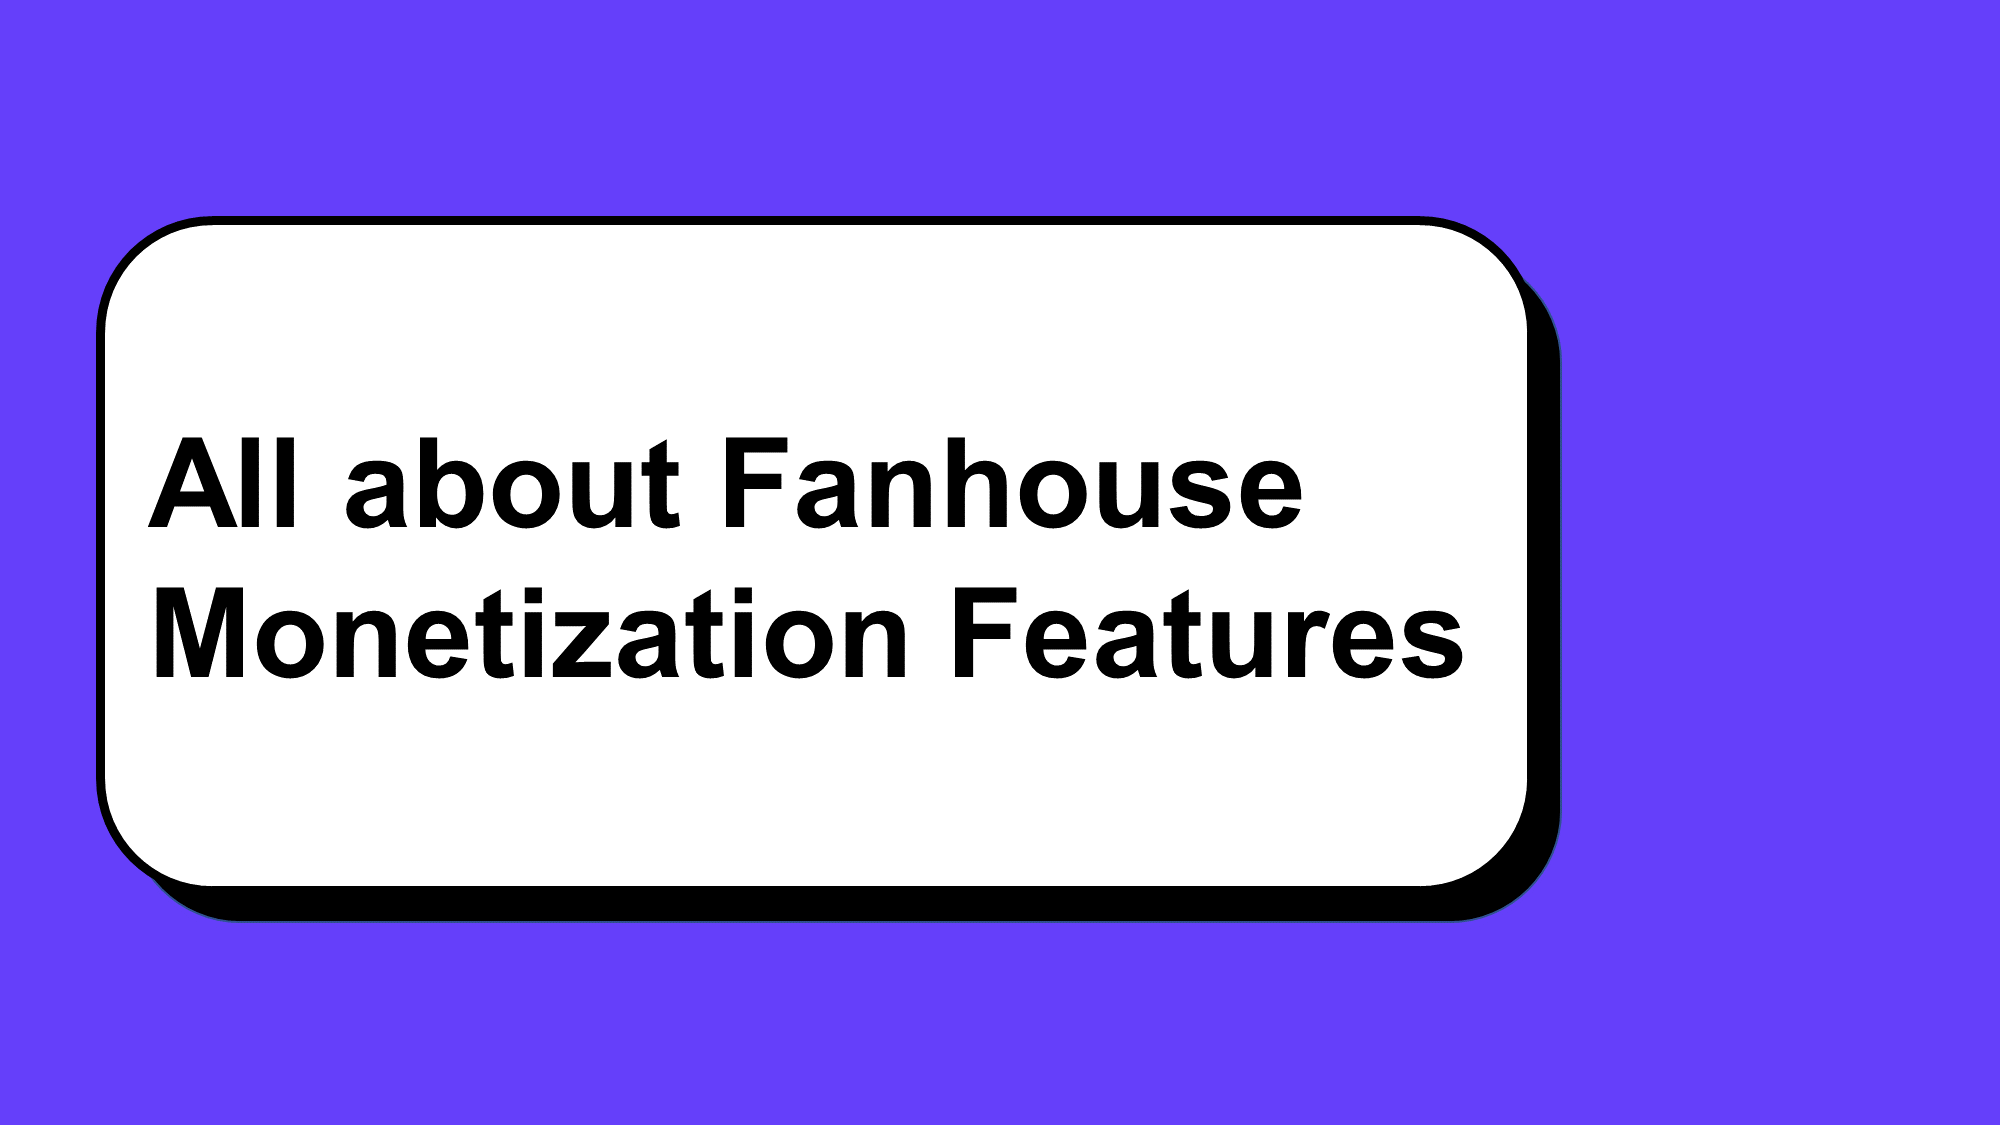 All about Fanhouse Monetization Features